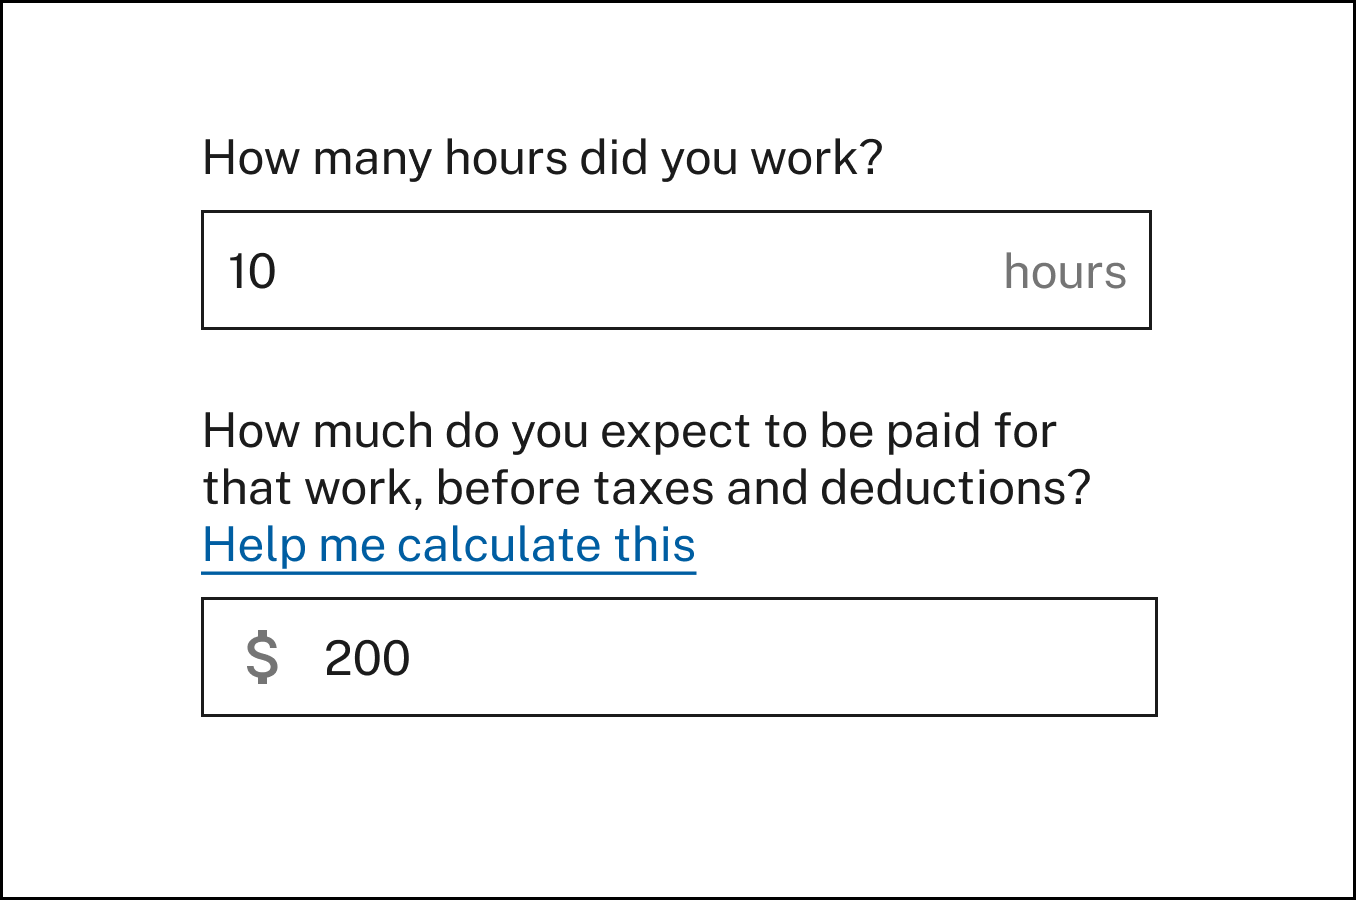 A sample screenshot asking how many hours were worked and what they expect to be paid before taxes and deductions.